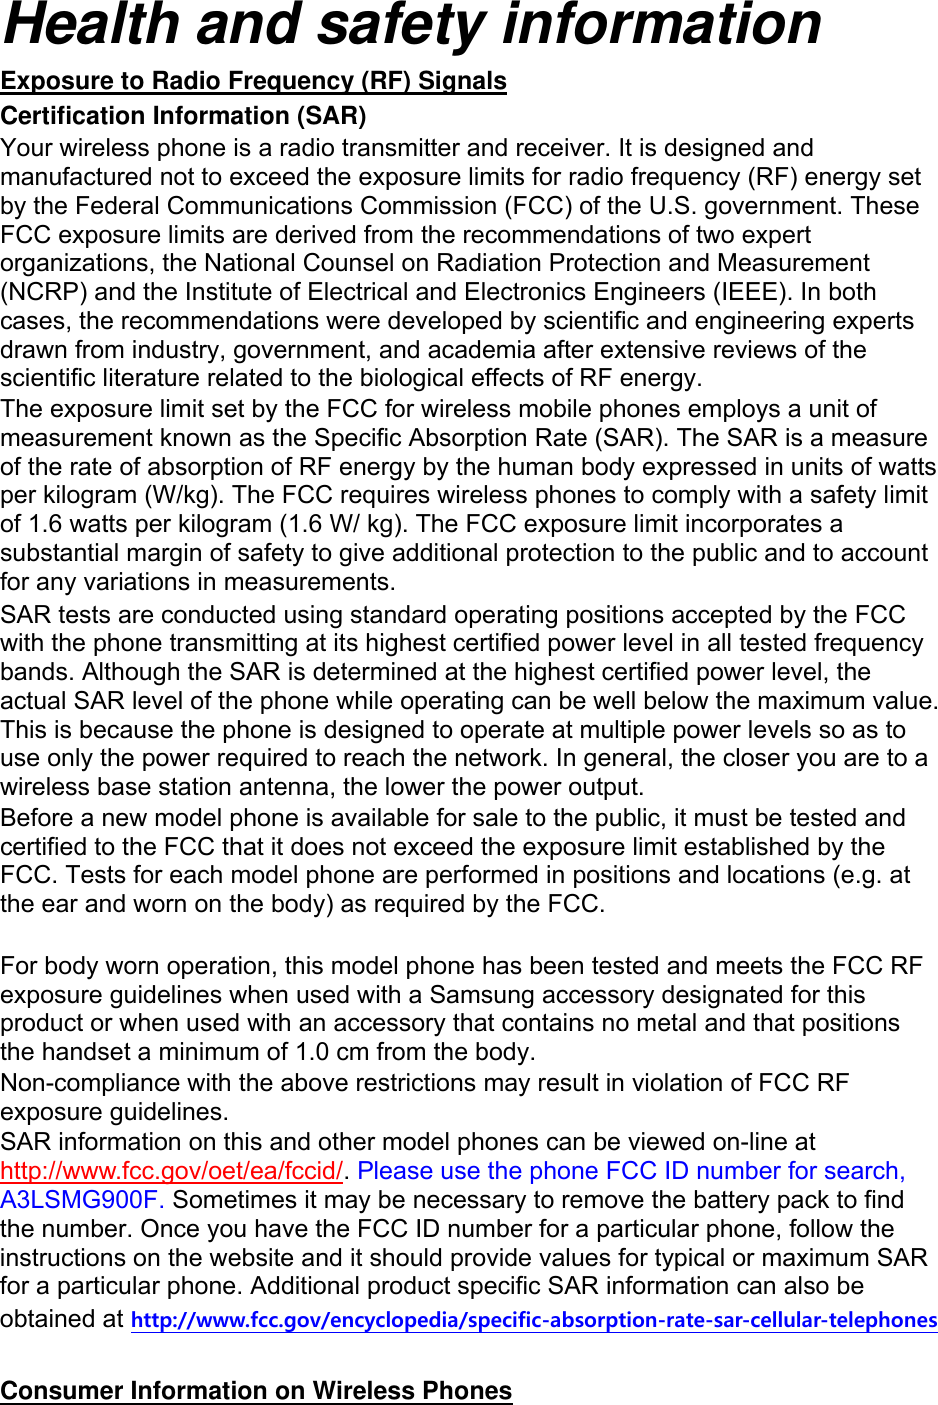 Health and safety information Exposure to Radio Frequency (RF) Signals Certification Information (SAR) Your wireless phone is a radio transmitter and receiver. It is designed and manufactured not to exceed the exposure limits for radio frequency (RF) energy set by the Federal Communications Commission (FCC) of the U.S. government. These FCC exposure limits are derived from the recommendations of two expert organizations, the National Counsel on Radiation Protection and Measurement (NCRP) and the Institute of Electrical and Electronics Engineers (IEEE). In both cases, the recommendations were developed by scientific and engineering experts drawn from industry, government, and academia after extensive reviews of the scientific literature related to the biological effects of RF energy. The exposure limit set by the FCC for wireless mobile phones employs a unit of measurement known as the Specific Absorption Rate (SAR). The SAR is a measure of the rate of absorption of RF energy by the human body expressed in units of watts per kilogram (W/kg). The FCC requires wireless phones to comply with a safety limit of 1.6 watts per kilogram (1.6 W/ kg). The FCC exposure limit incorporates a substantial margin of safety to give additional protection to the public and to account for any variations in measurements. SAR tests are conducted using standard operating positions accepted by the FCC with the phone transmitting at its highest certified power level in all tested frequency bands. Although the SAR is determined at the highest certified power level, the actual SAR level of the phone while operating can be well below the maximum value. This is because the phone is designed to operate at multiple power levels so as to use only the power required to reach the network. In general, the closer you are to a wireless base station antenna, the lower the power output. Before a new model phone is available for sale to the public, it must be tested and certified to the FCC that it does not exceed the exposure limit established by the FCC. Tests for each model phone are performed in positions and locations (e.g. at the ear and worn on the body) as required by the FCC.      For body worn operation, this model phone has been tested and meets the FCC RF exposure guidelines when used with a Samsung accessory designated for this product or when used with an accessory that contains no metal and that positions the handset a minimum of 1.0 cm from the body.   Non-compliance with the above restrictions may result in violation of FCC RF exposure guidelines. SAR information on this and other model phones can be viewed on-line at http://www.fcc.gov/oet/ea/fccid/. Please use the phone FCC ID number for search, A3LSMG900F. Sometimes it may be necessary to remove the battery pack to find the number. Once you have the FCC ID number for a particular phone, follow the instructions on the website and it should provide values for typical or maximum SAR for a particular phone. Additional product specific SAR information can also be obtained at http://www.fcc.gov/encyclopedia/specific-absorption-rate-sar-cellular-telephones  Consumer Information on Wireless Phones 